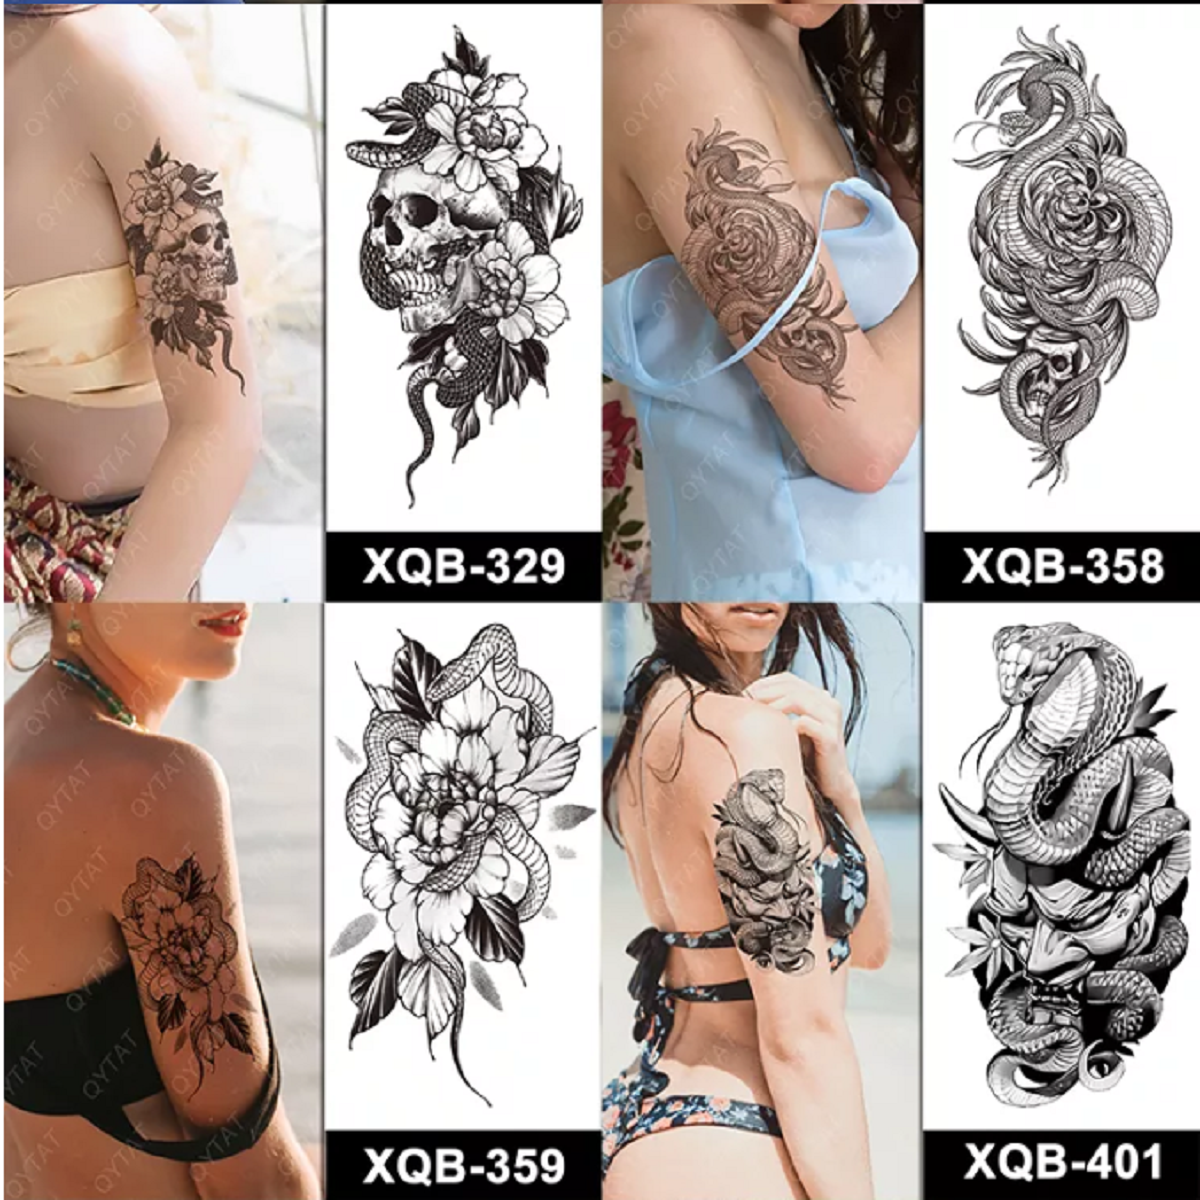 10 Sheets Black Snake Temporary Tattoos with Flower Zombie Sword For Men Women Neck Arm Body Art Waterproof Fake Tattoo Stickers Flash Decals